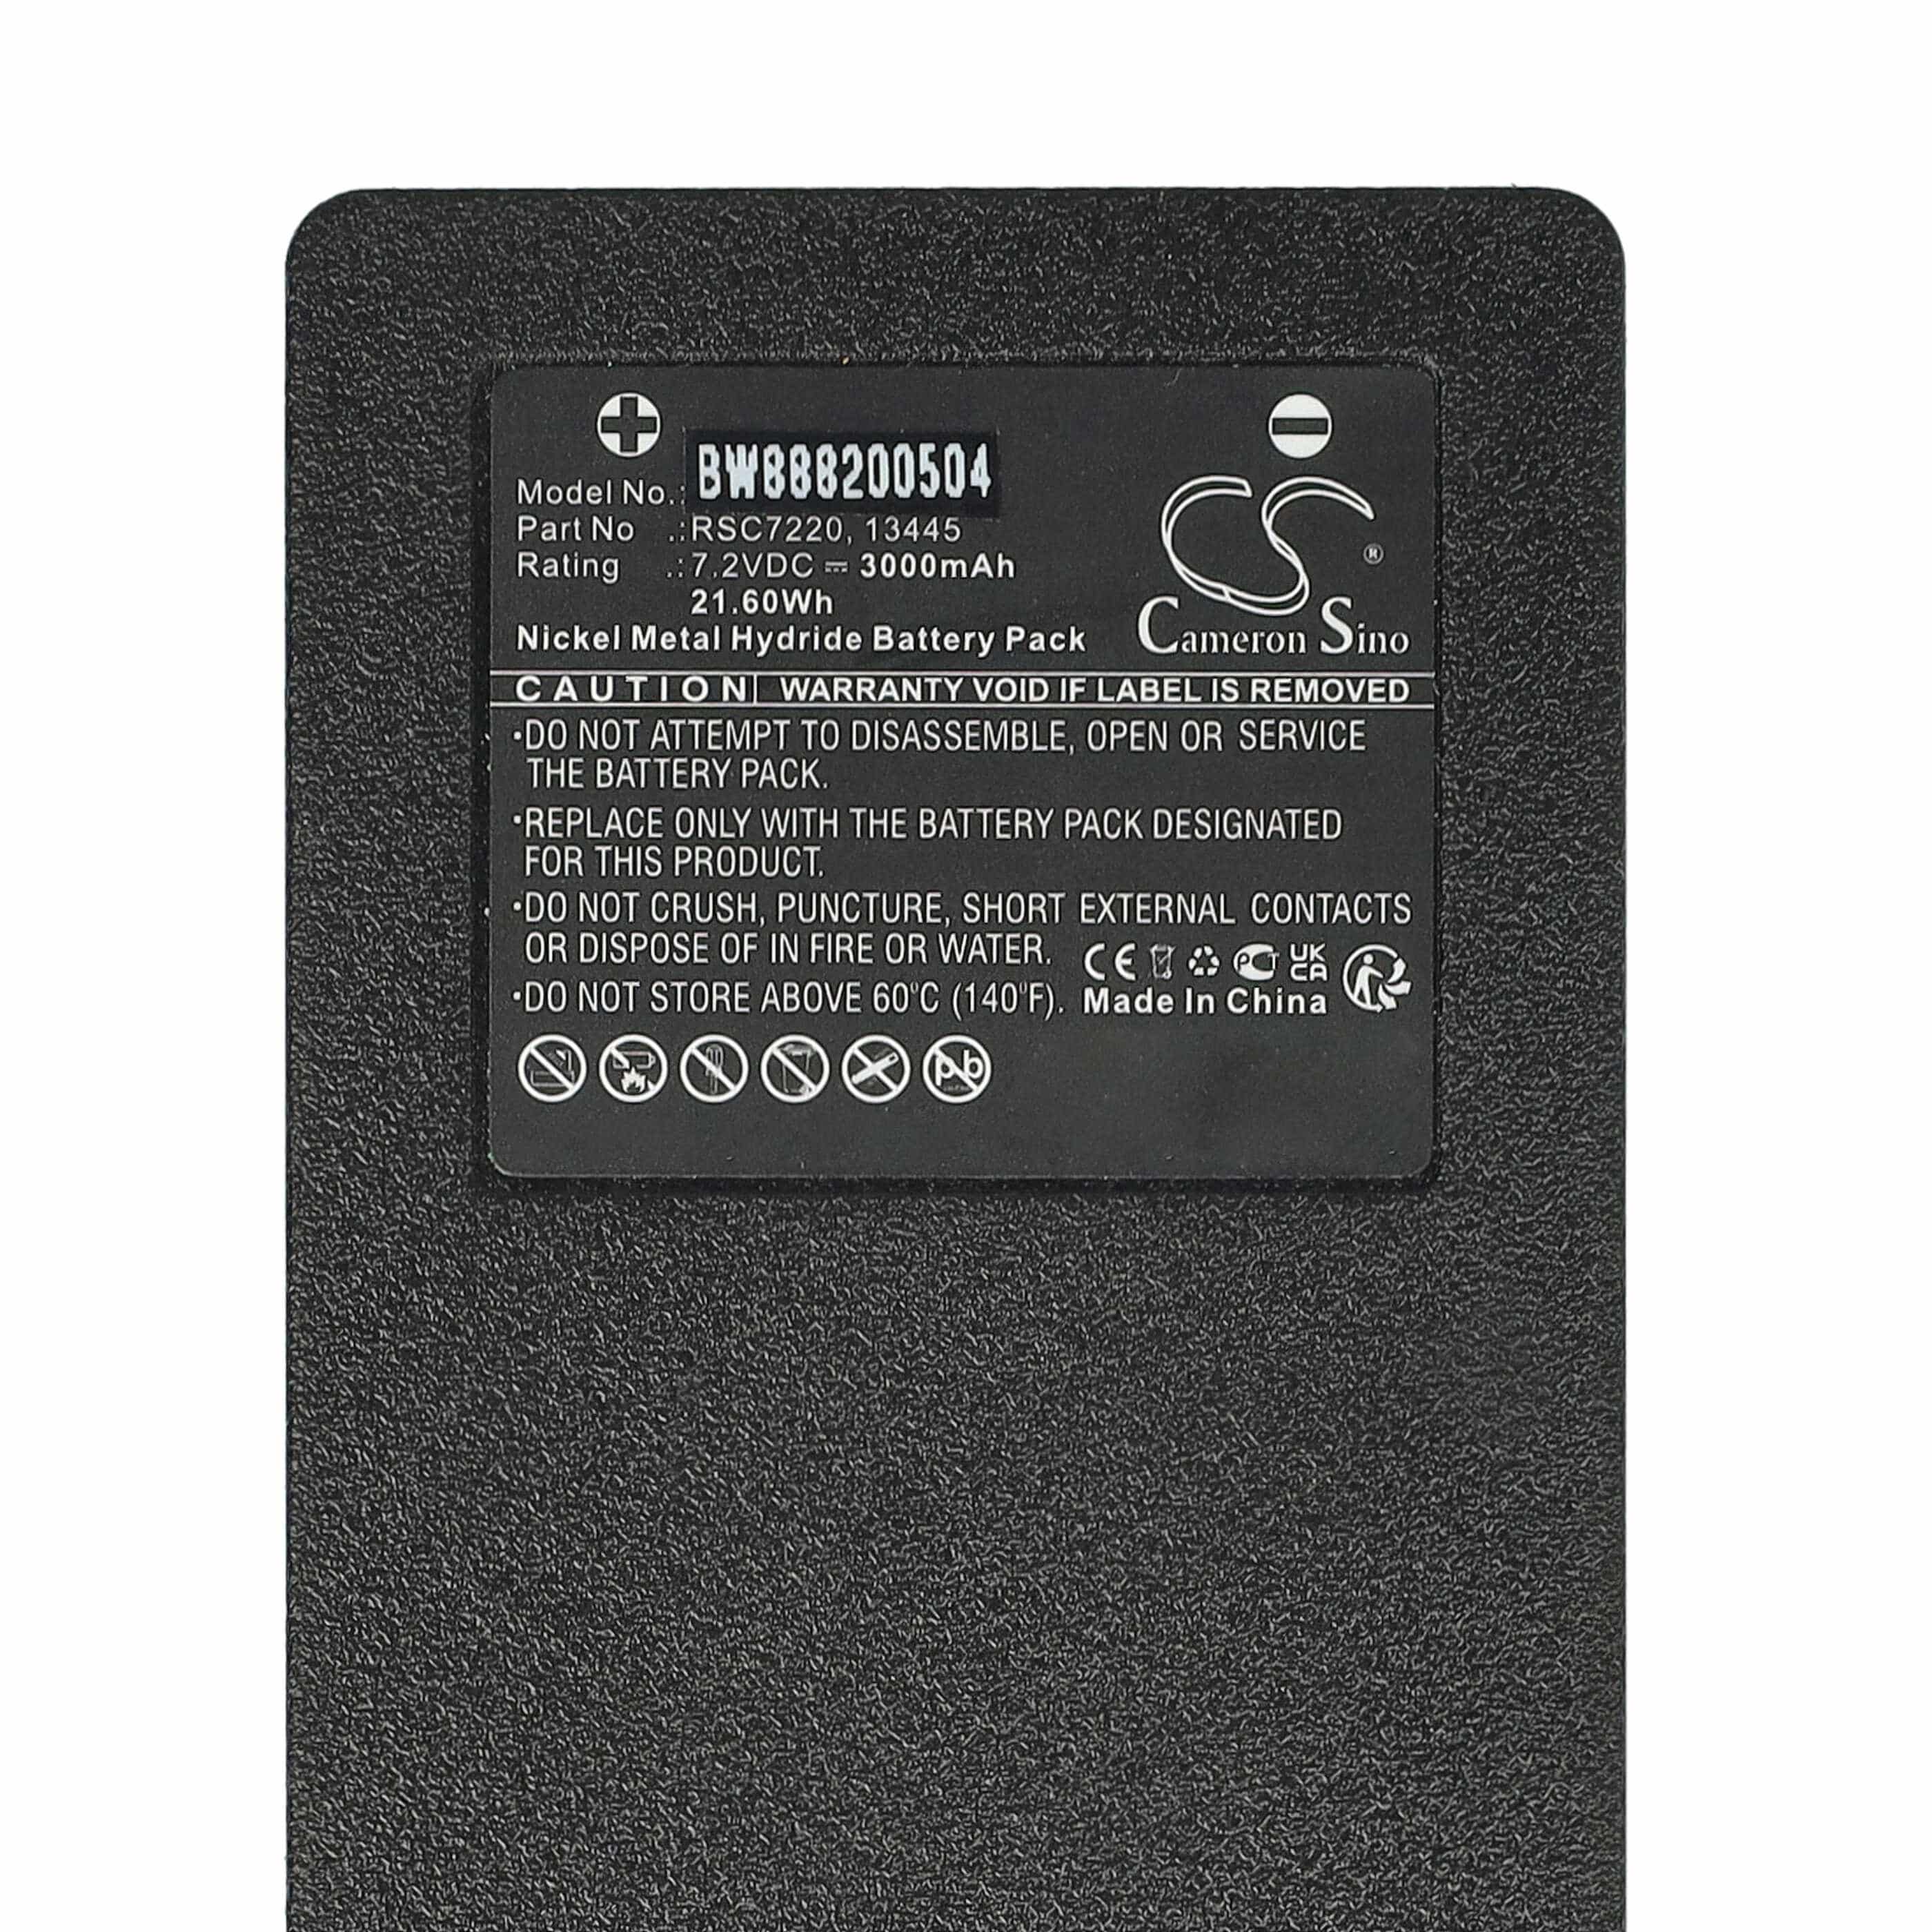 Industrial Remote Control Battery Replacement for Palfinger 17162, 16131, 1026, 13445 - 3000mAh 7.2V NiMH